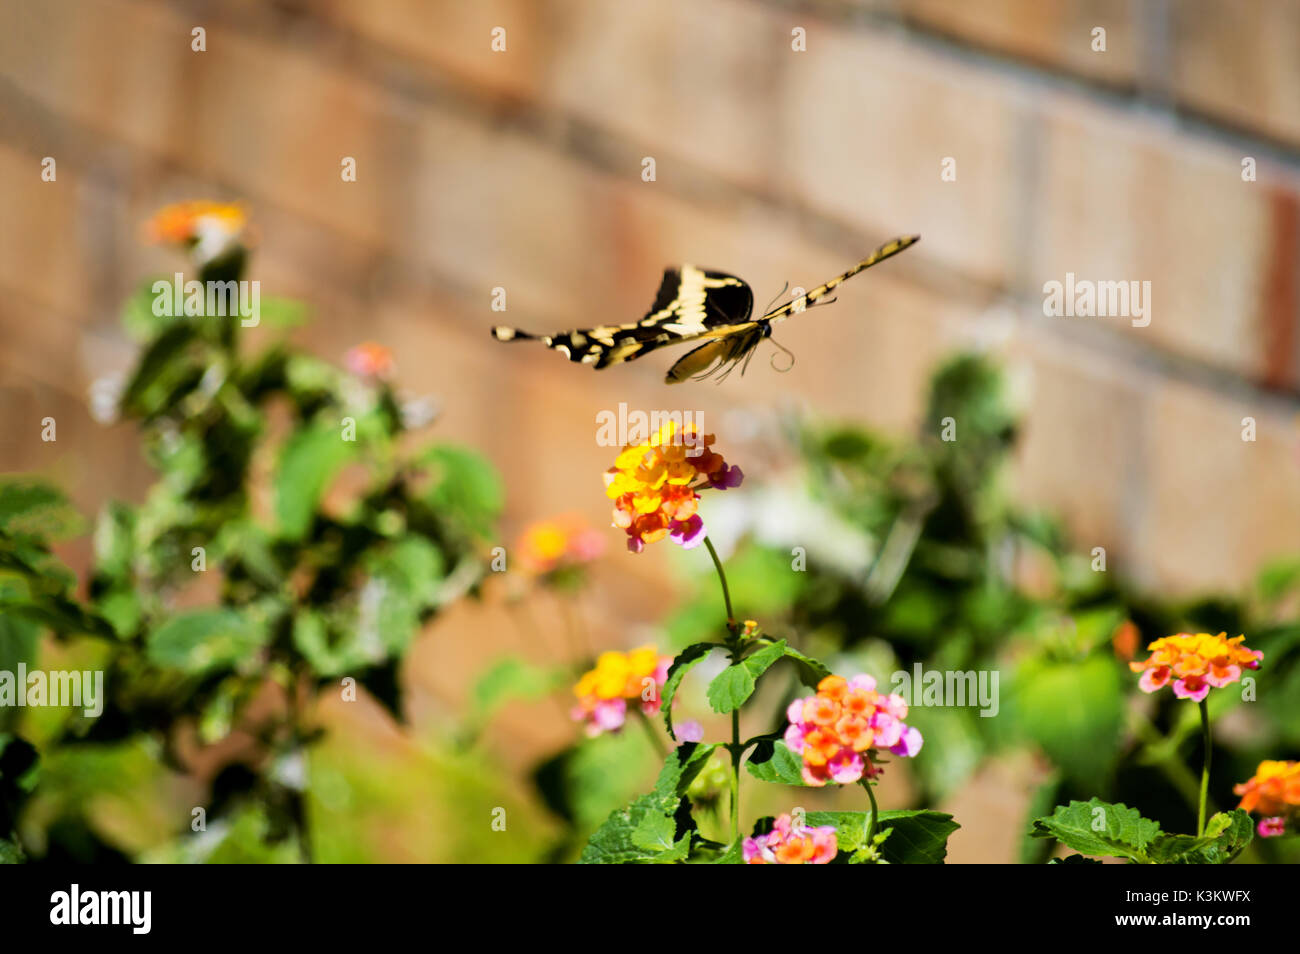 A swallowtail butterfly floating over a multi-color lantana plant with a brick background. Stock Photo